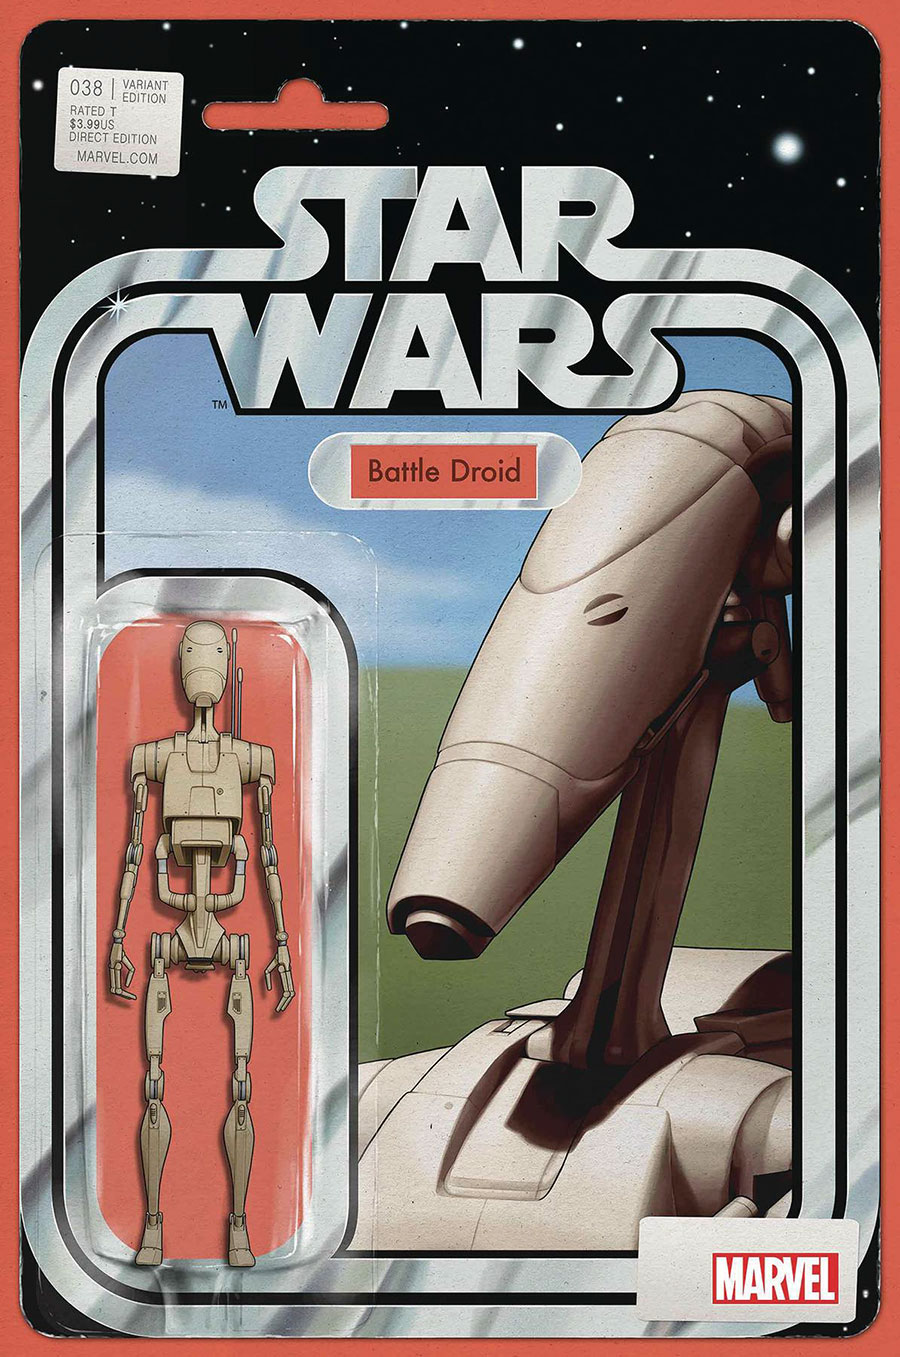 Star Wars Vol 5 #38 Cover E Variant John Tyler Christopher Action Figure Cover (Dark Droids Tie-In)